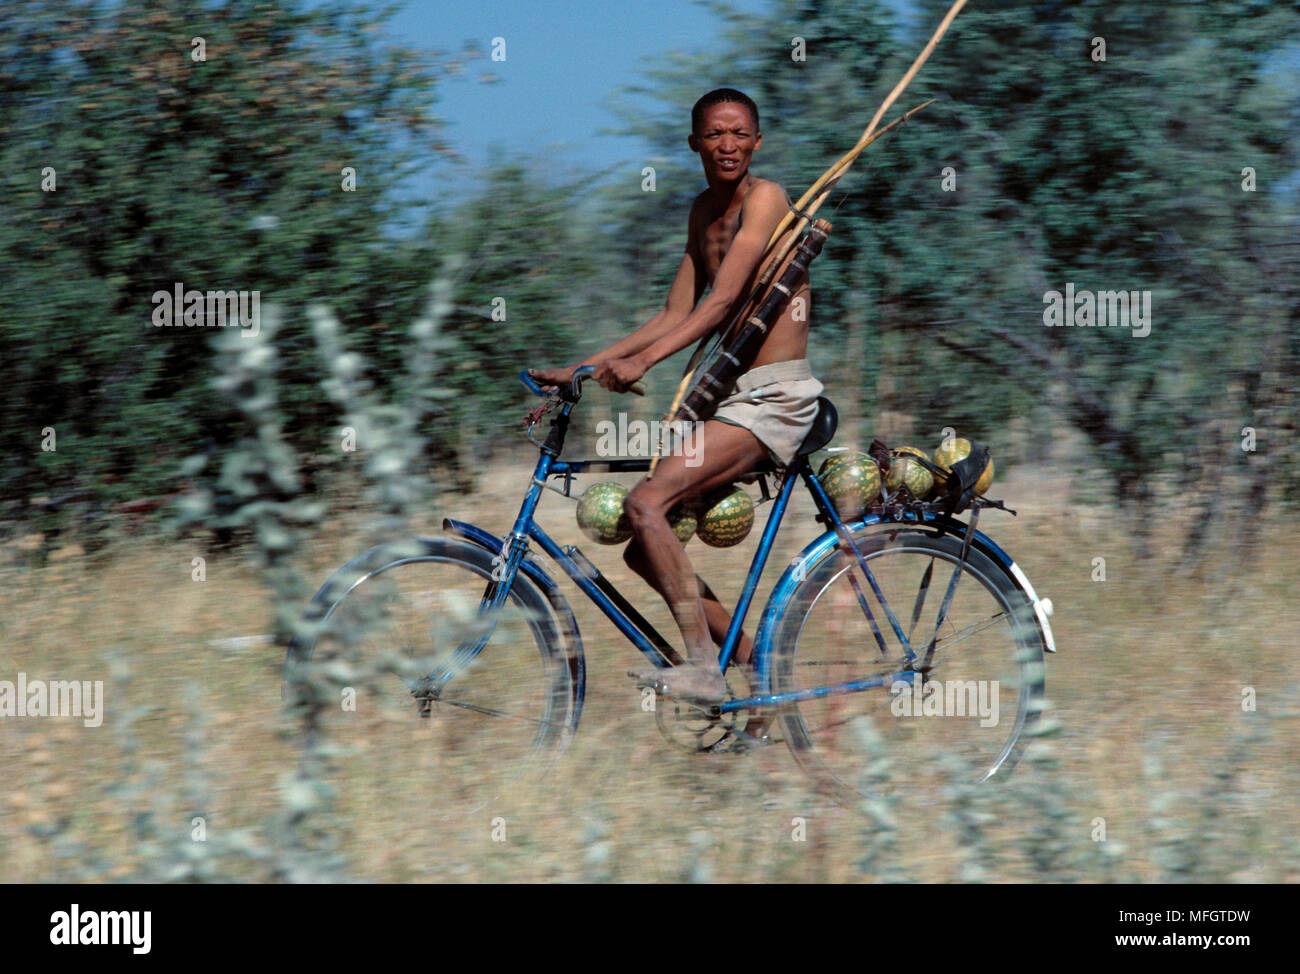 BUSHMAN HUNTER on bicycle  with bow & arrows  (cycles long distances  in search of quarry) Stock Photo